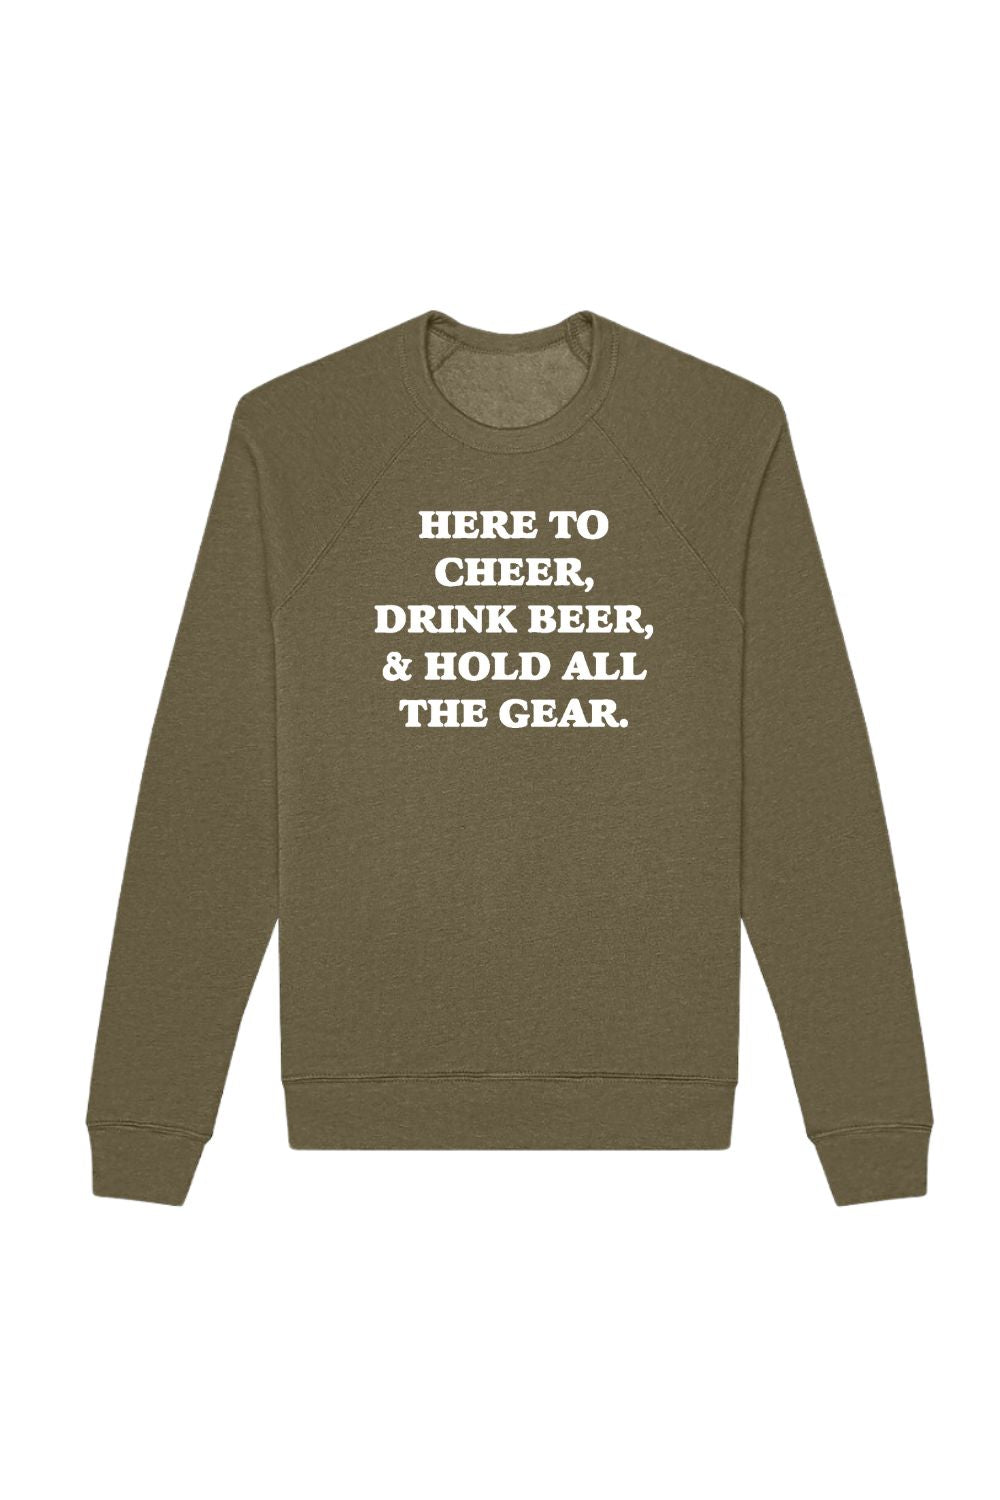 Here to Cheer, Drink Beer & Hold all the Gear Sweatshirt